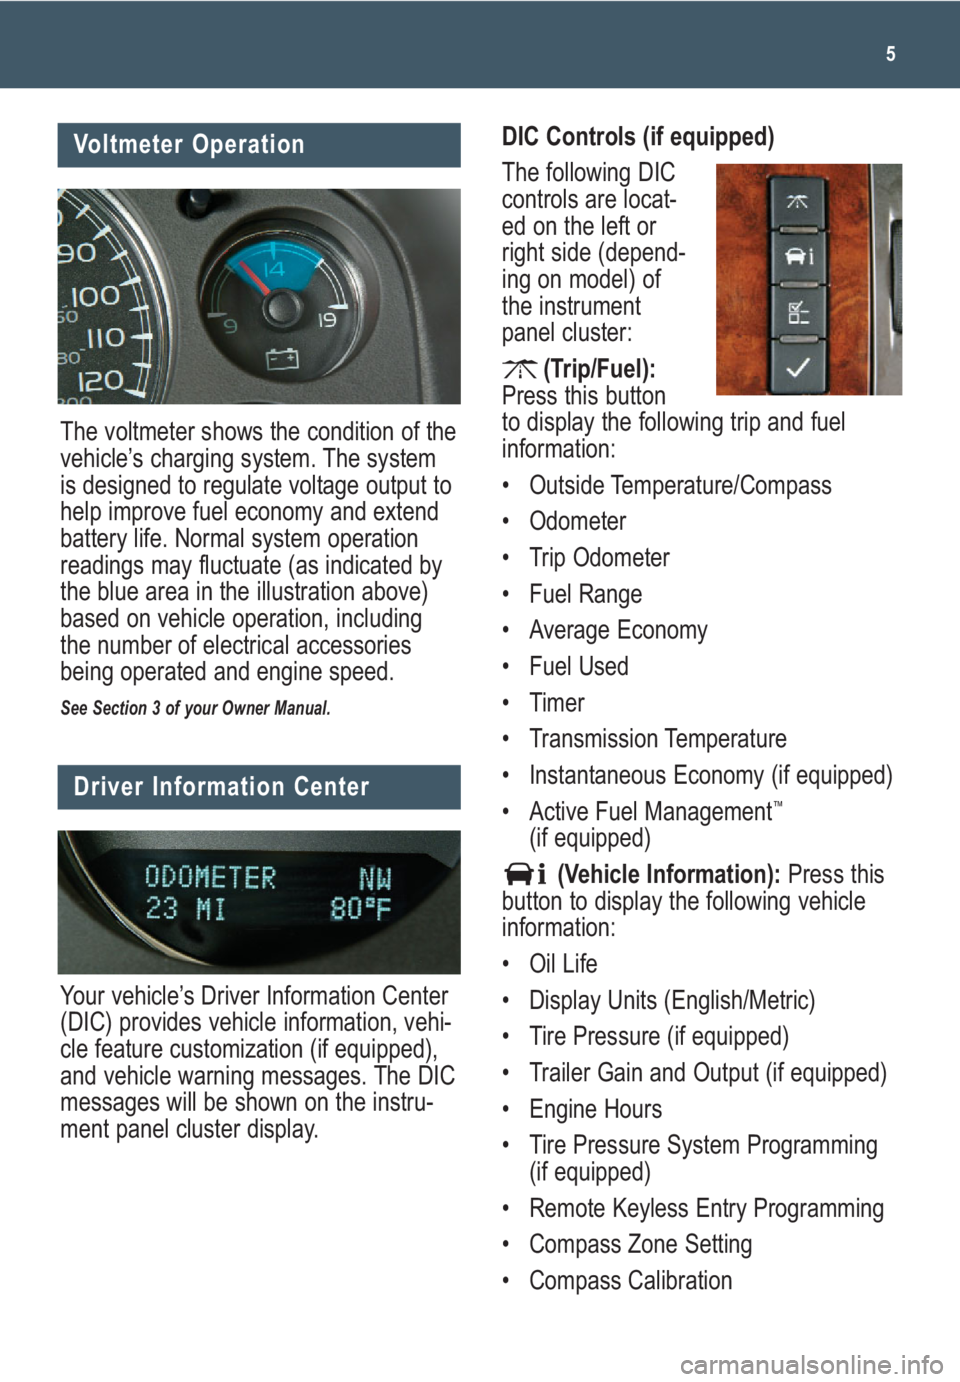 GMC SIERRA 2009  Get To Know Guide 5
Voltmeter Operation
The voltmeter shows the condition of the
vehicle’s charging system. The system
is designed to regulate voltage output to
help improve fuel economy and extend
battery life. Norm